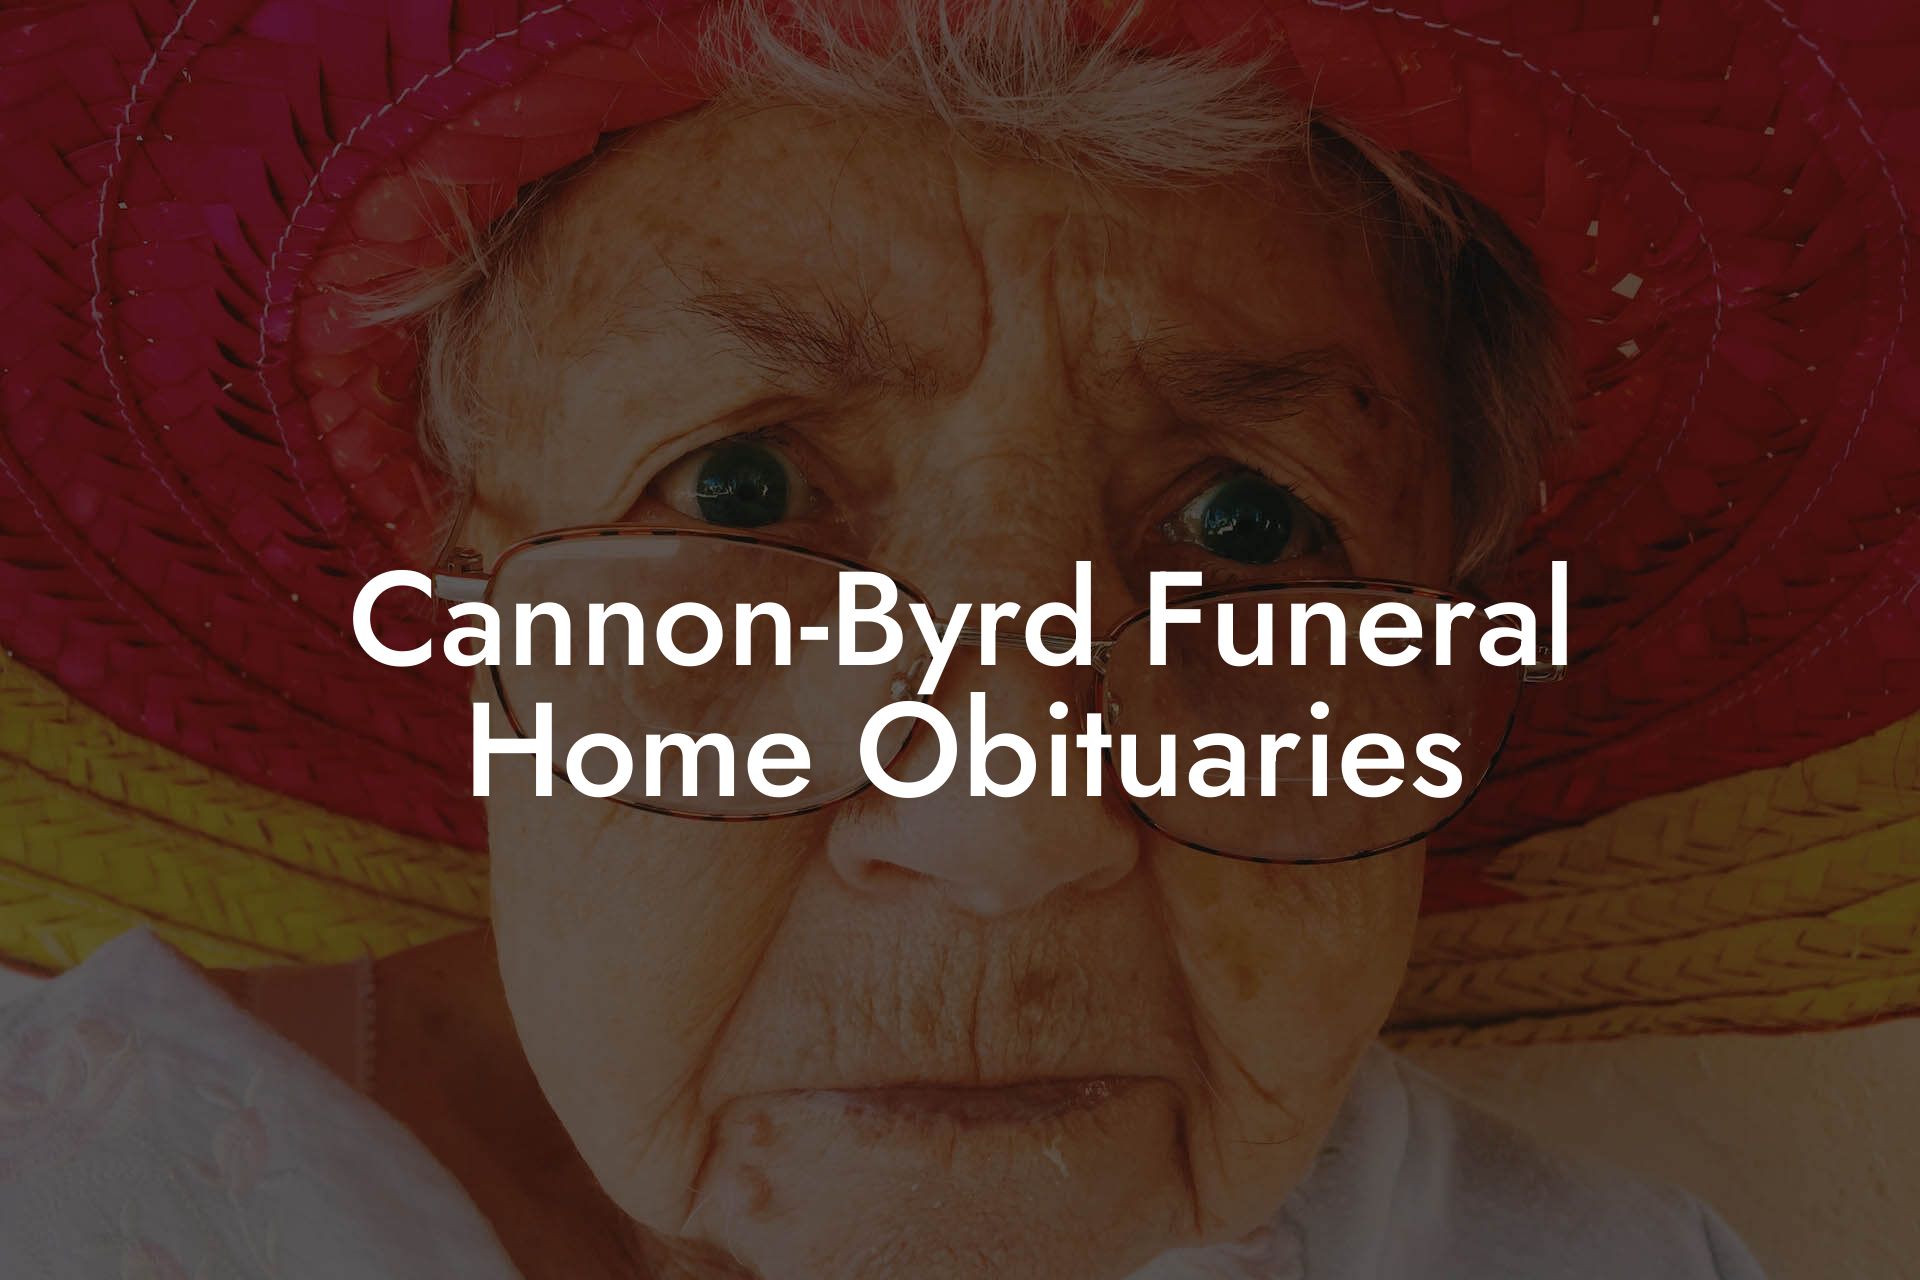 Cannon-Byrd Funeral Home Obituaries